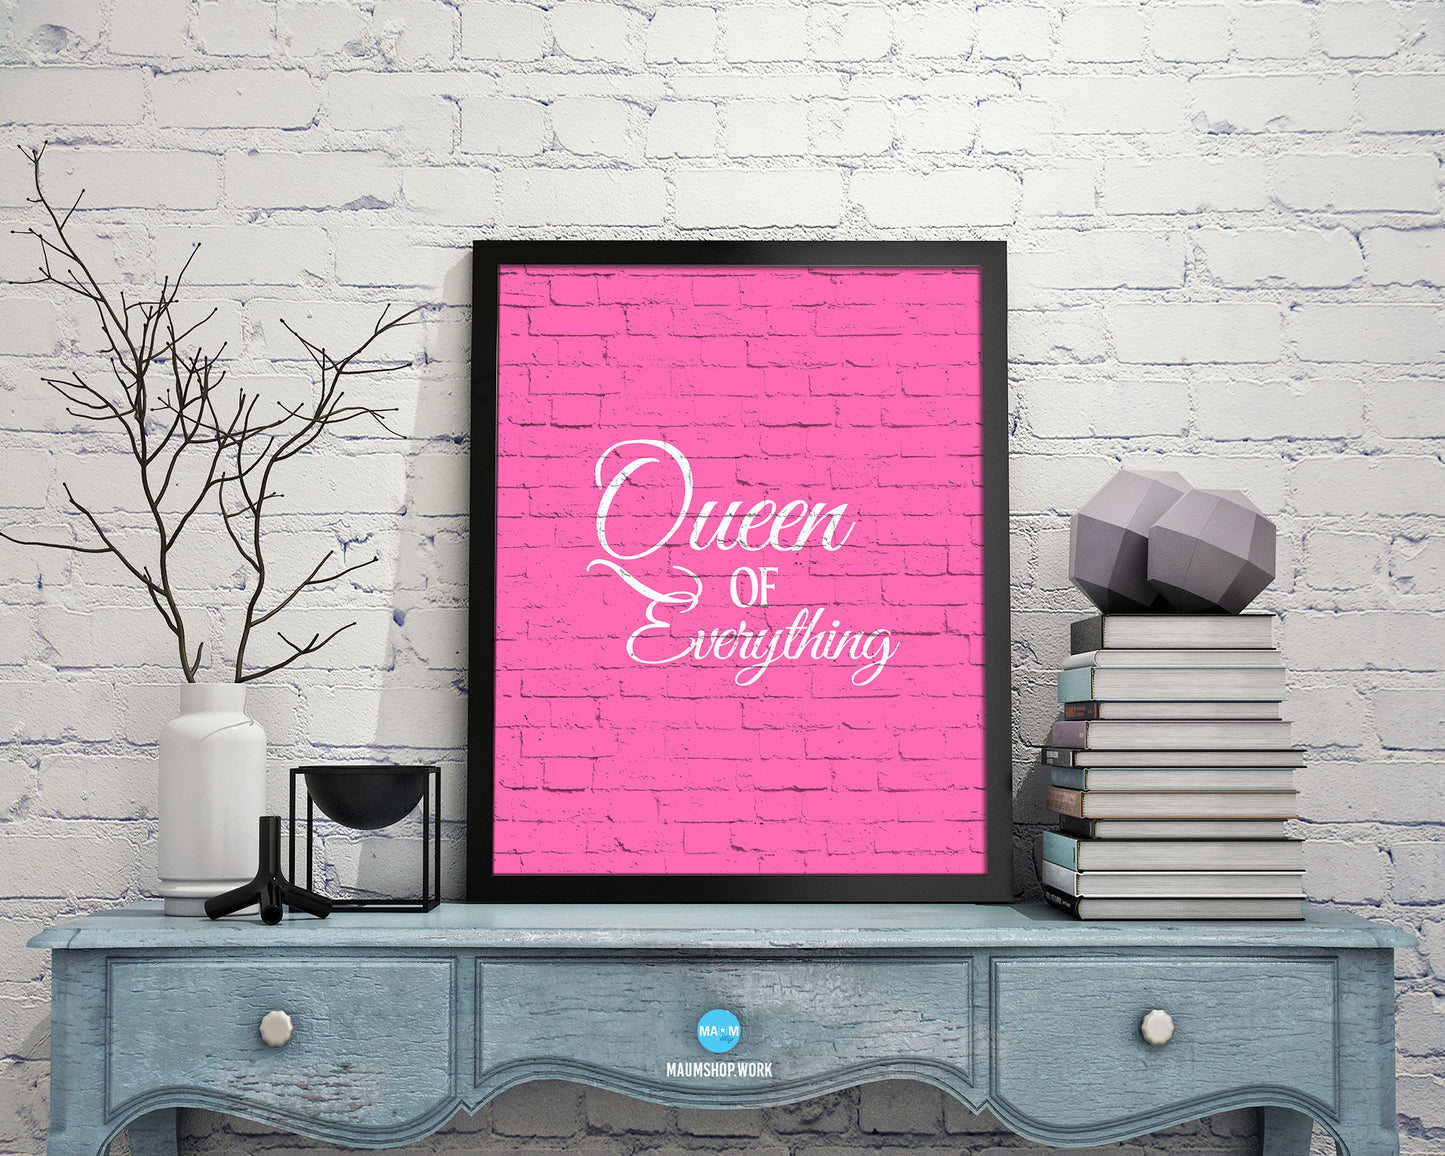 Queen of Everythig Rainbow Pride Peace Right Justice Poster Wood Framed Wall Decor Print Gifts